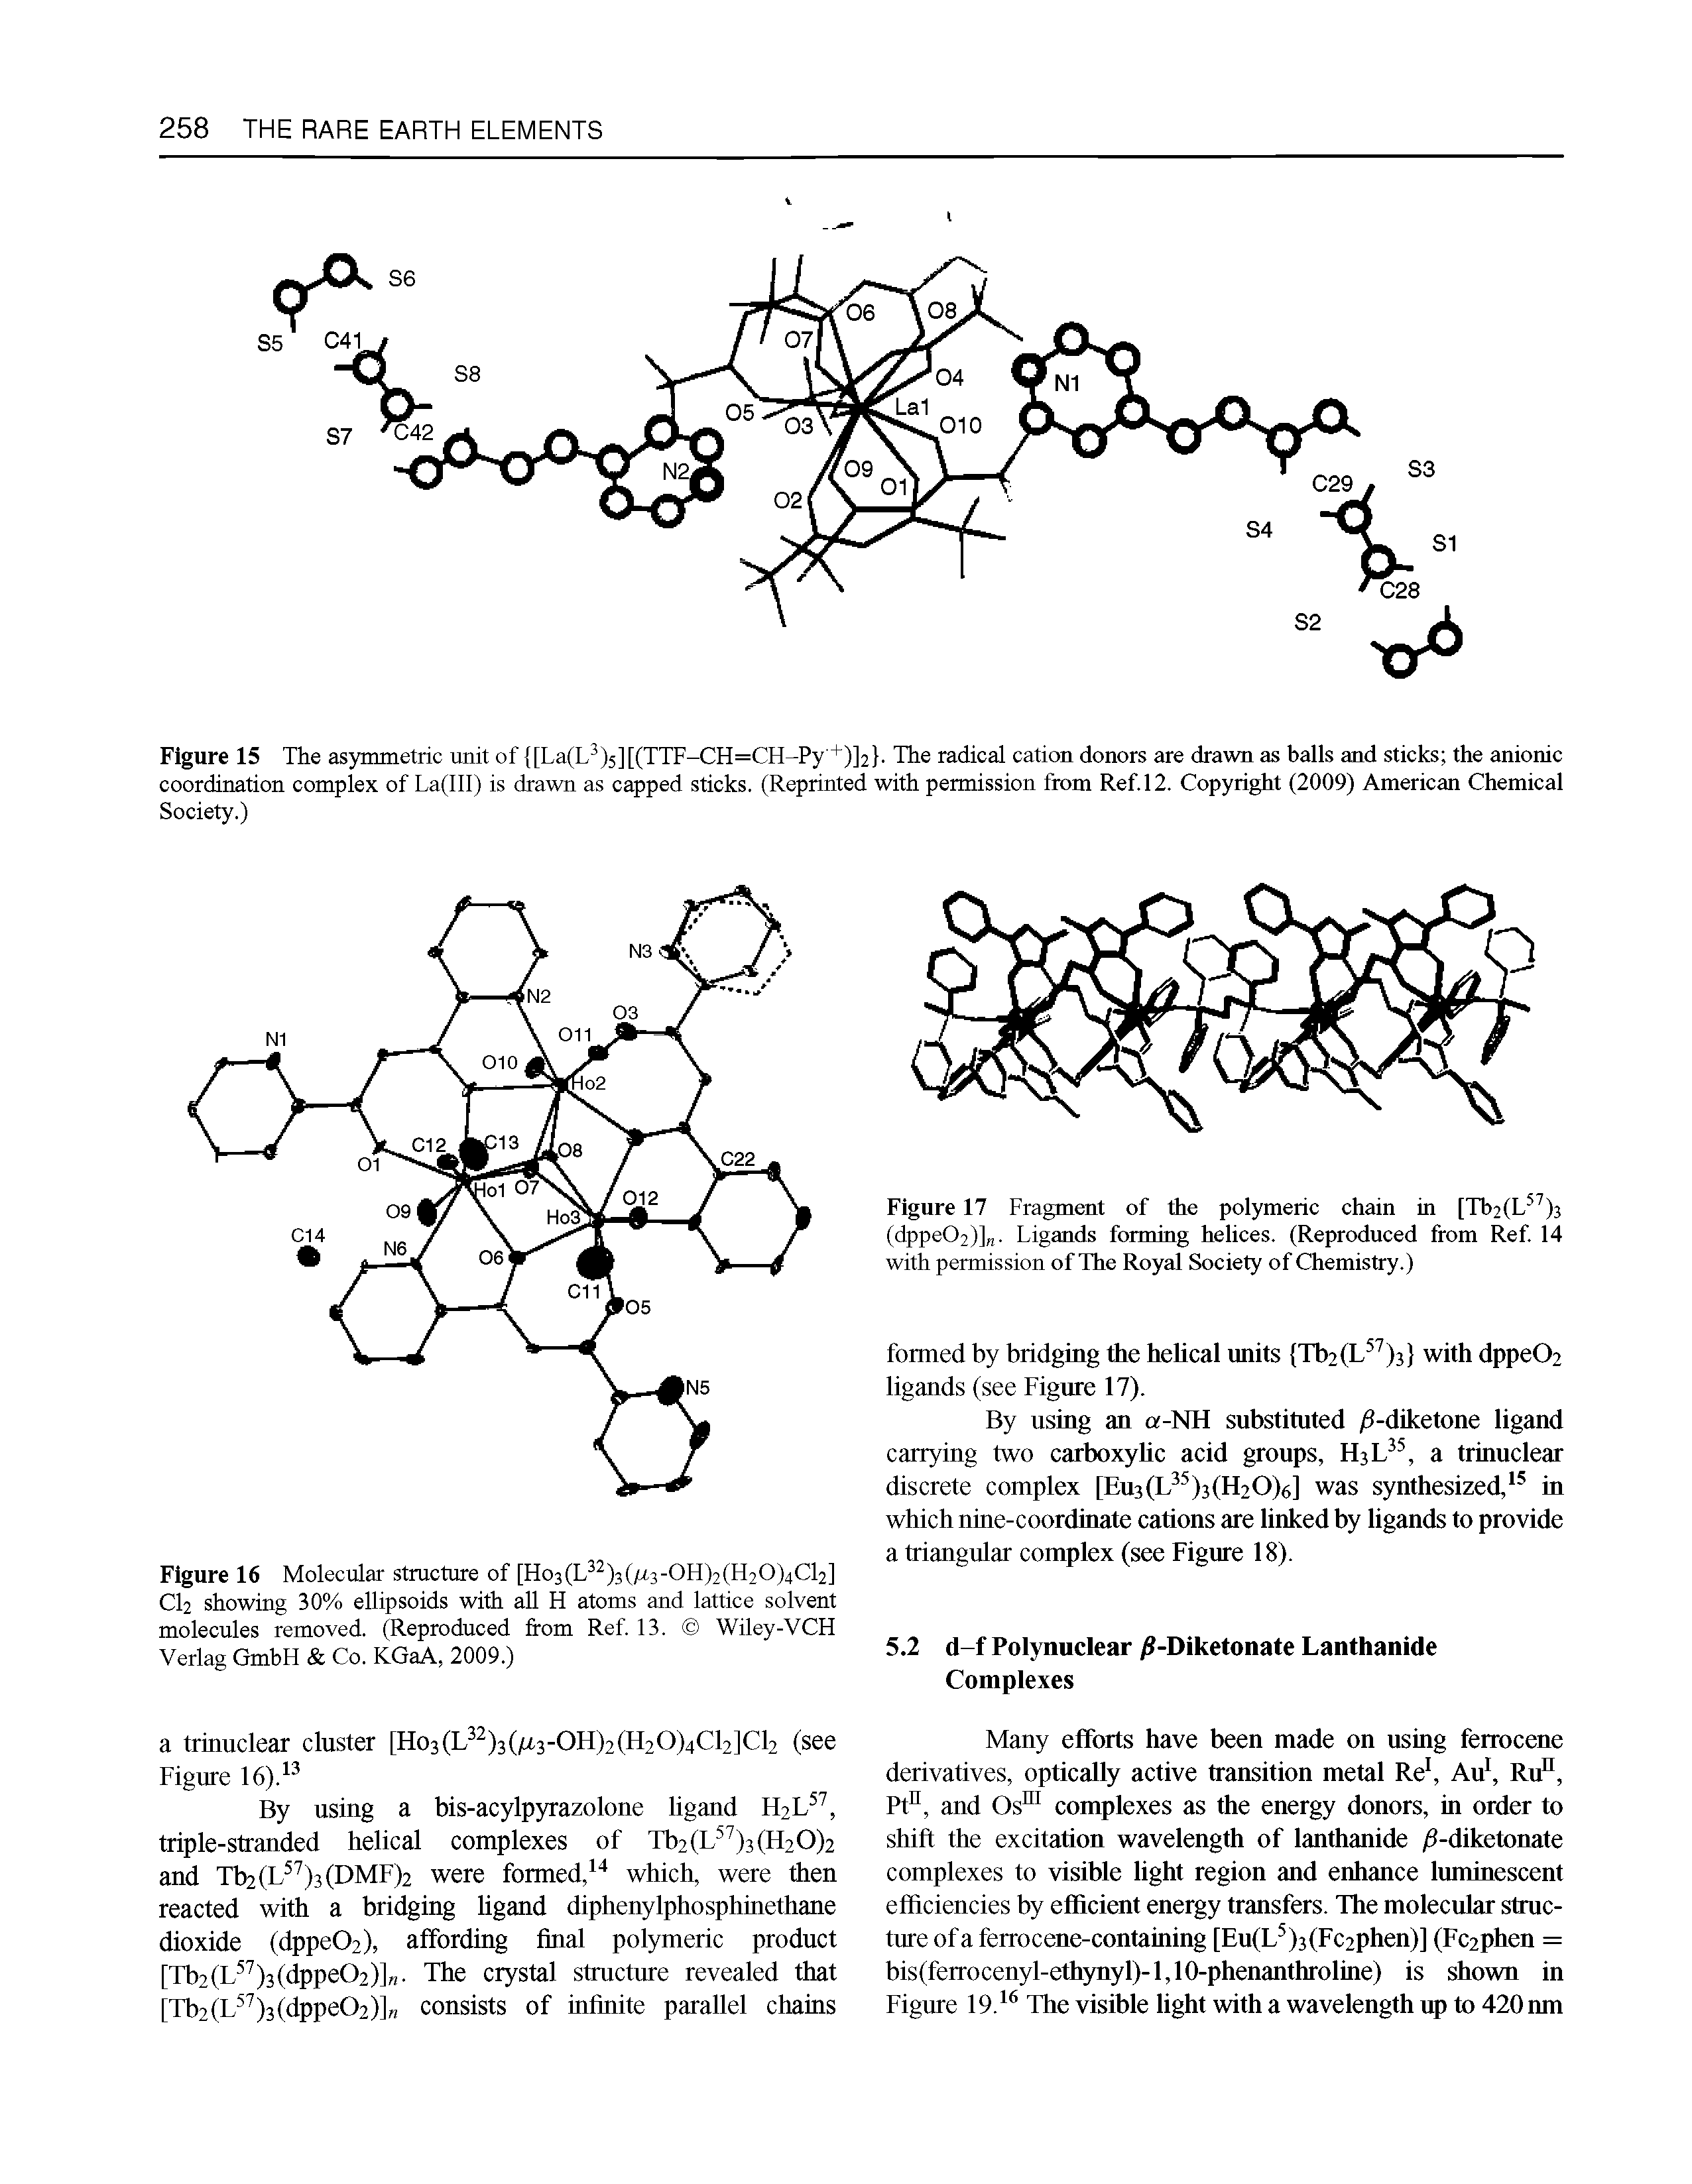 Figure 15 The asymmetric unit of [La(L )5][(TTF-CH=CH-Py +)]2 - The radical cation donors are drawn as balls and sticks the anionic coordination complex of La(III) is drawn as capped sticks. (Reprinted with permission from Ref. 12. Copyright (2009) American Chemical Society.)...